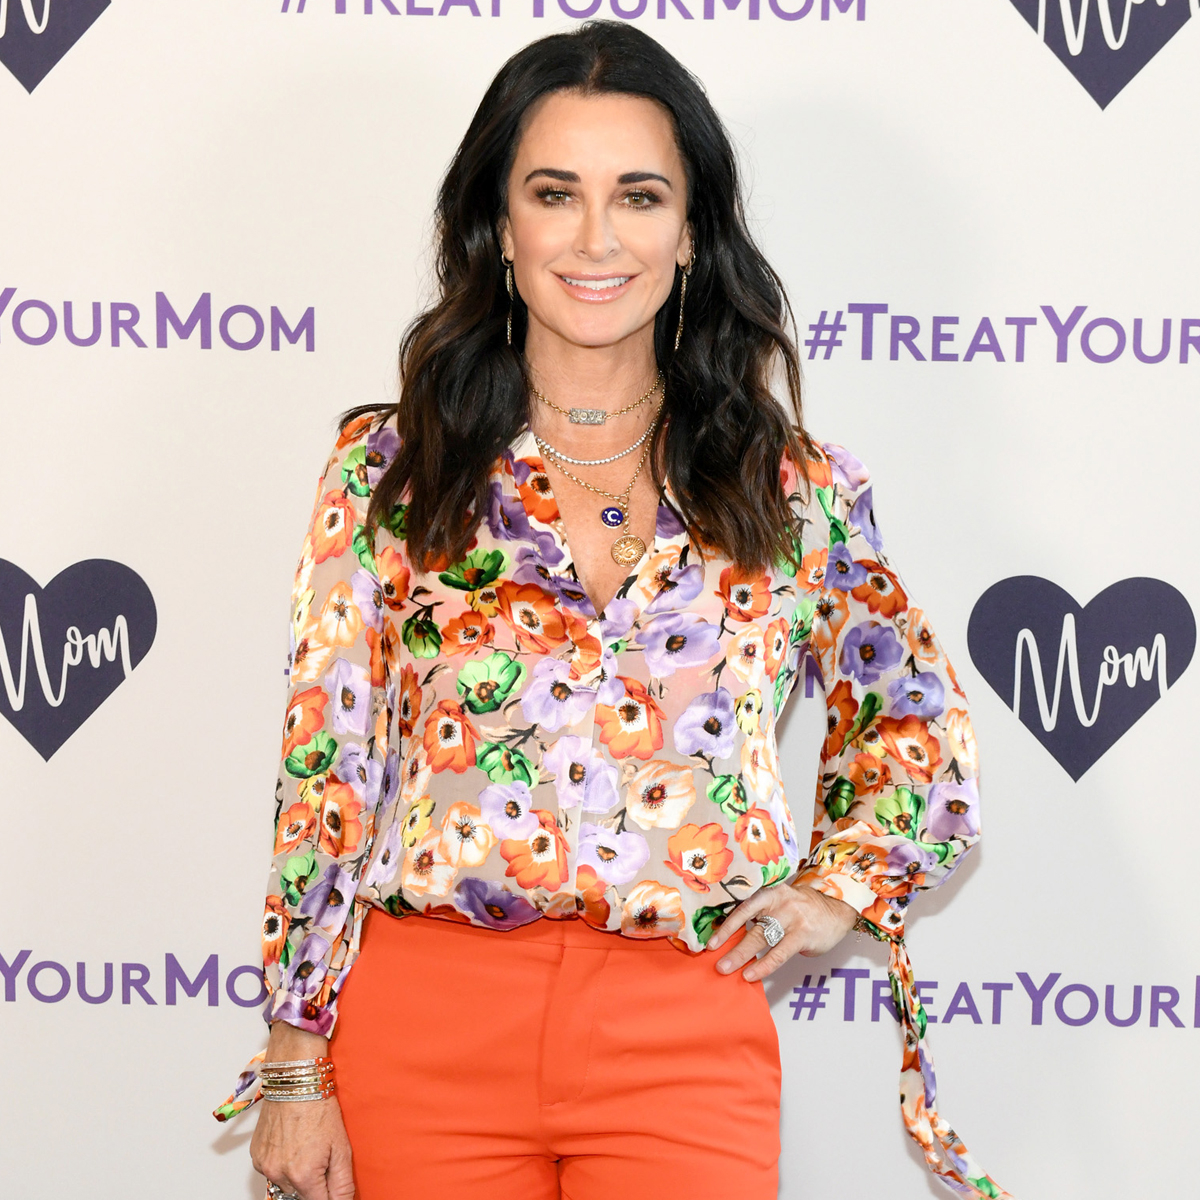 Kyle Richards looks summer-ready with bright yellow bag